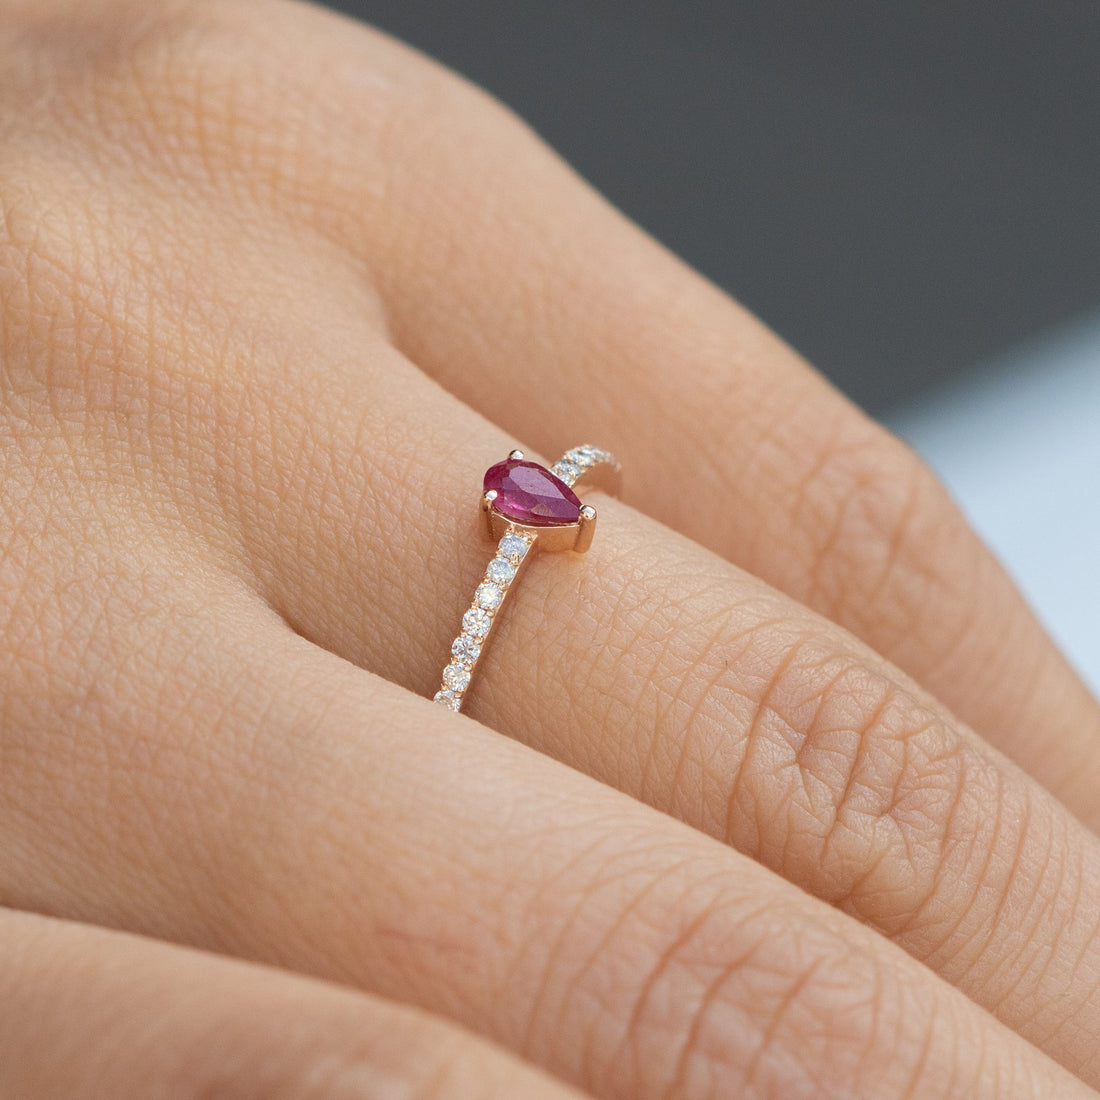  14K Yellow Gold Natural Ruby and Diamond Engagement Ring Shop online from Artisan Brands